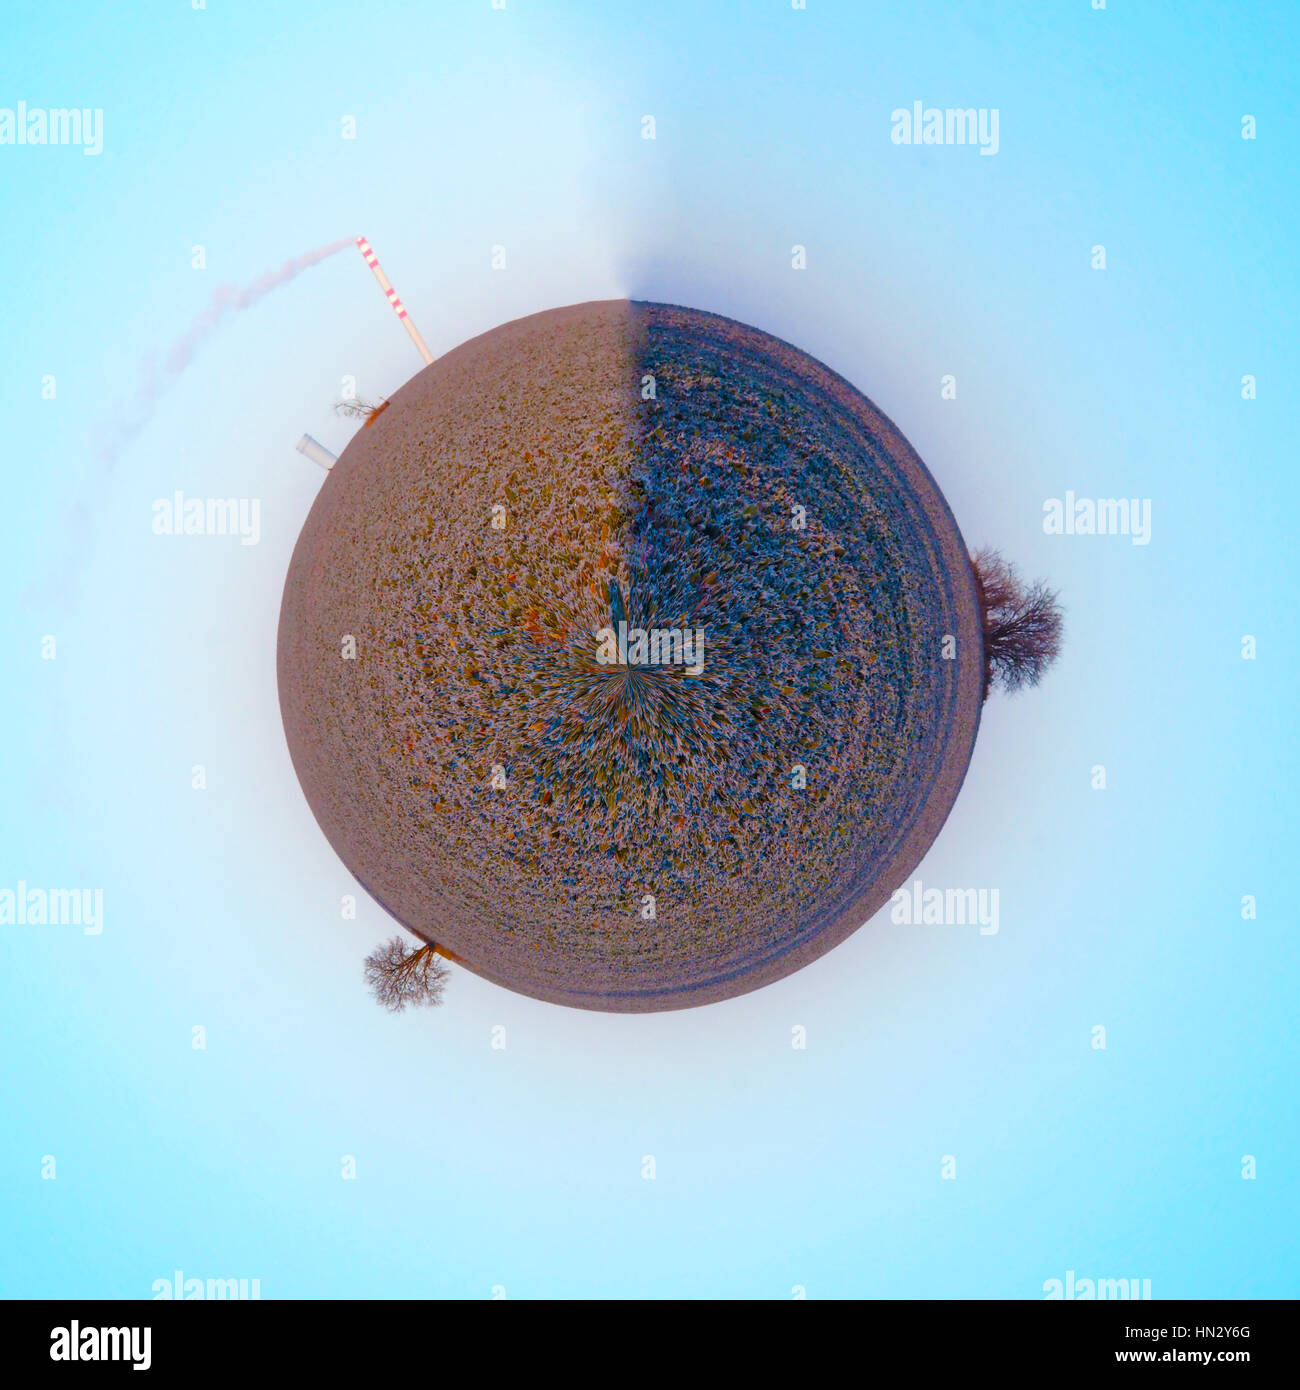 Tiny planet effect of frozen winter nature Stock Photo